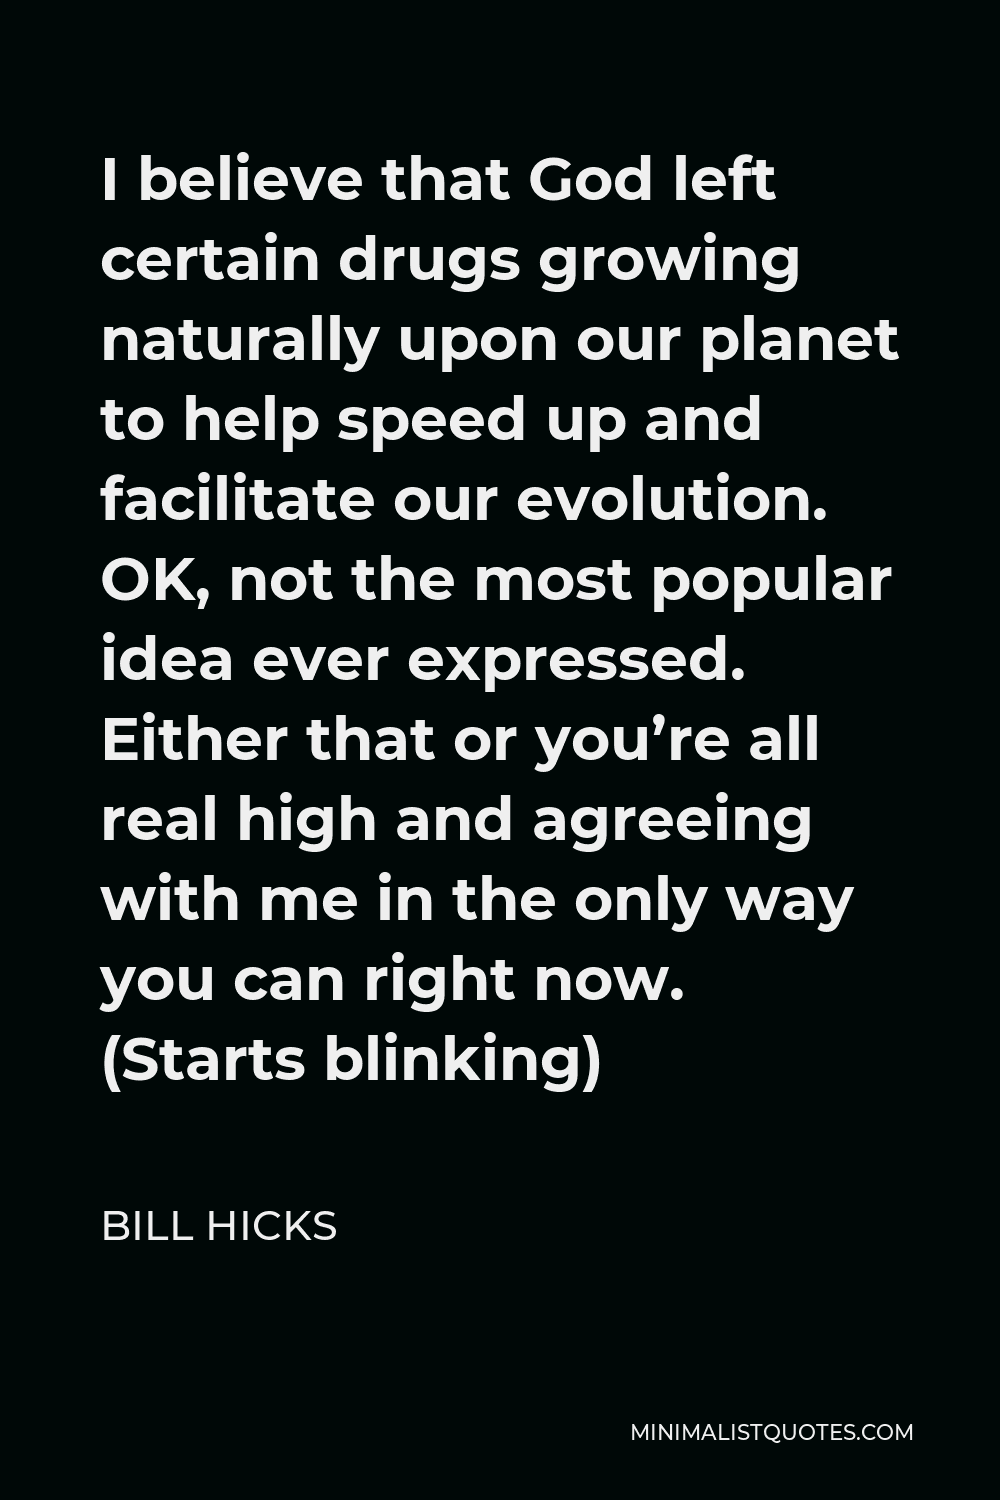 Bill Hicks Quote - I believe that God left certain drugs growing naturally upon our planet to help speed up and facilitate our evolution. OK, not the most popular idea ever expressed. Either that or you’re all real high and agreeing with me in the only way you can right now. (Starts blinking)